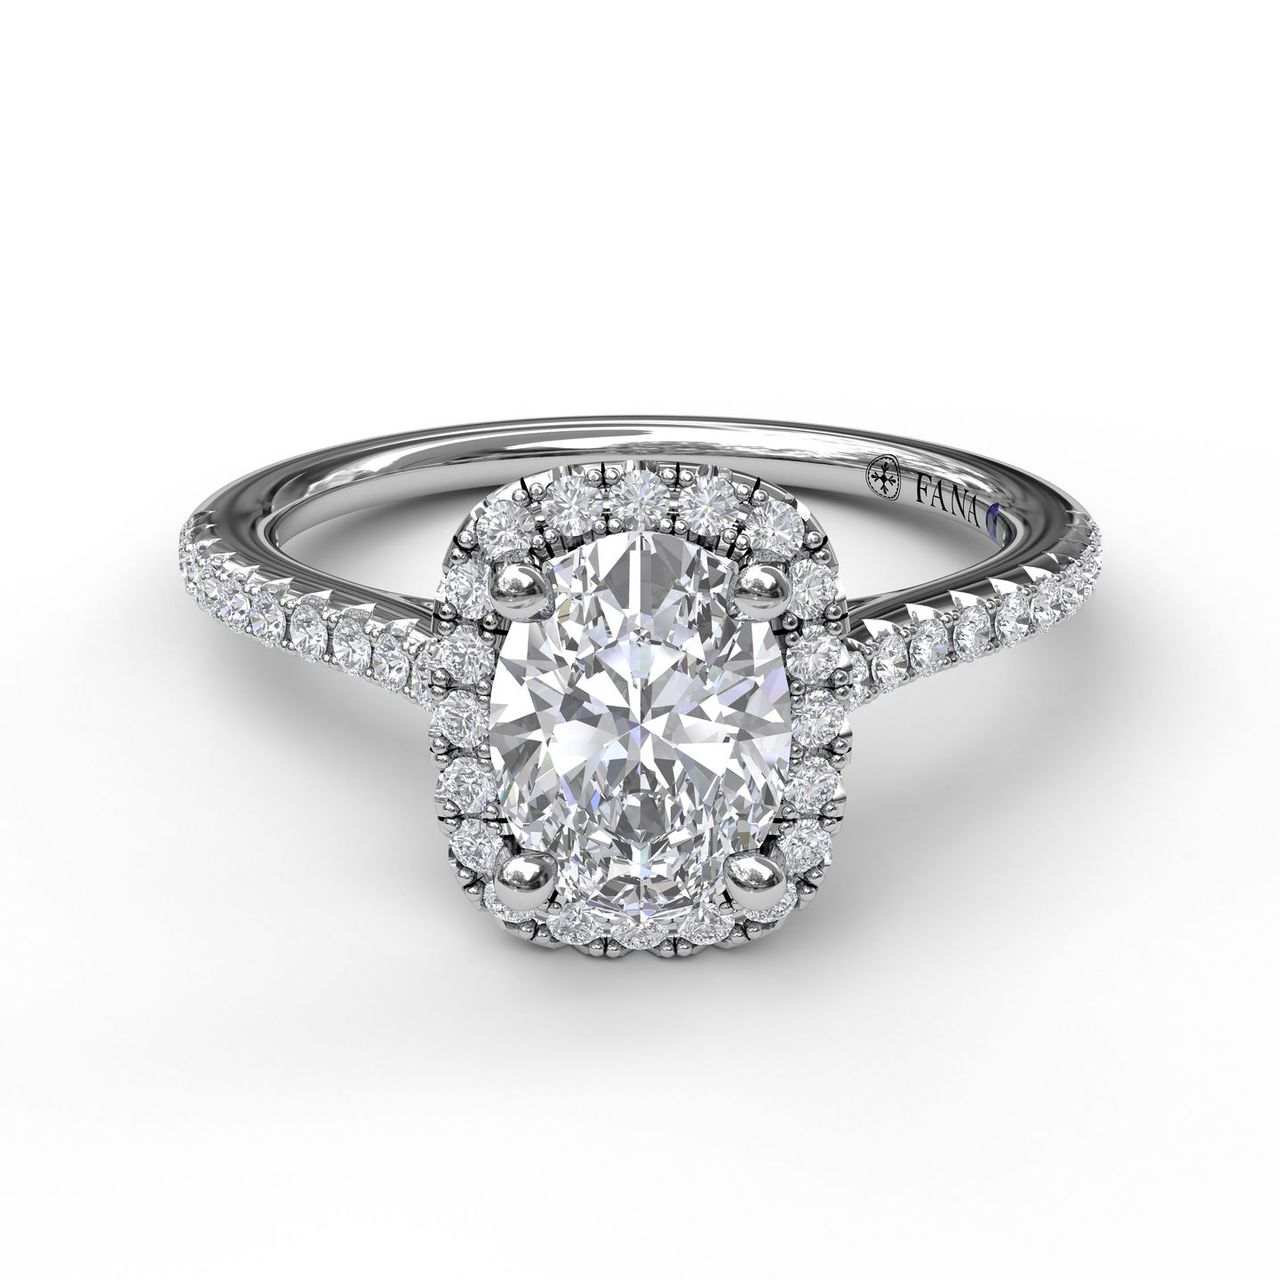 Pin on Engagement Ring Ideas